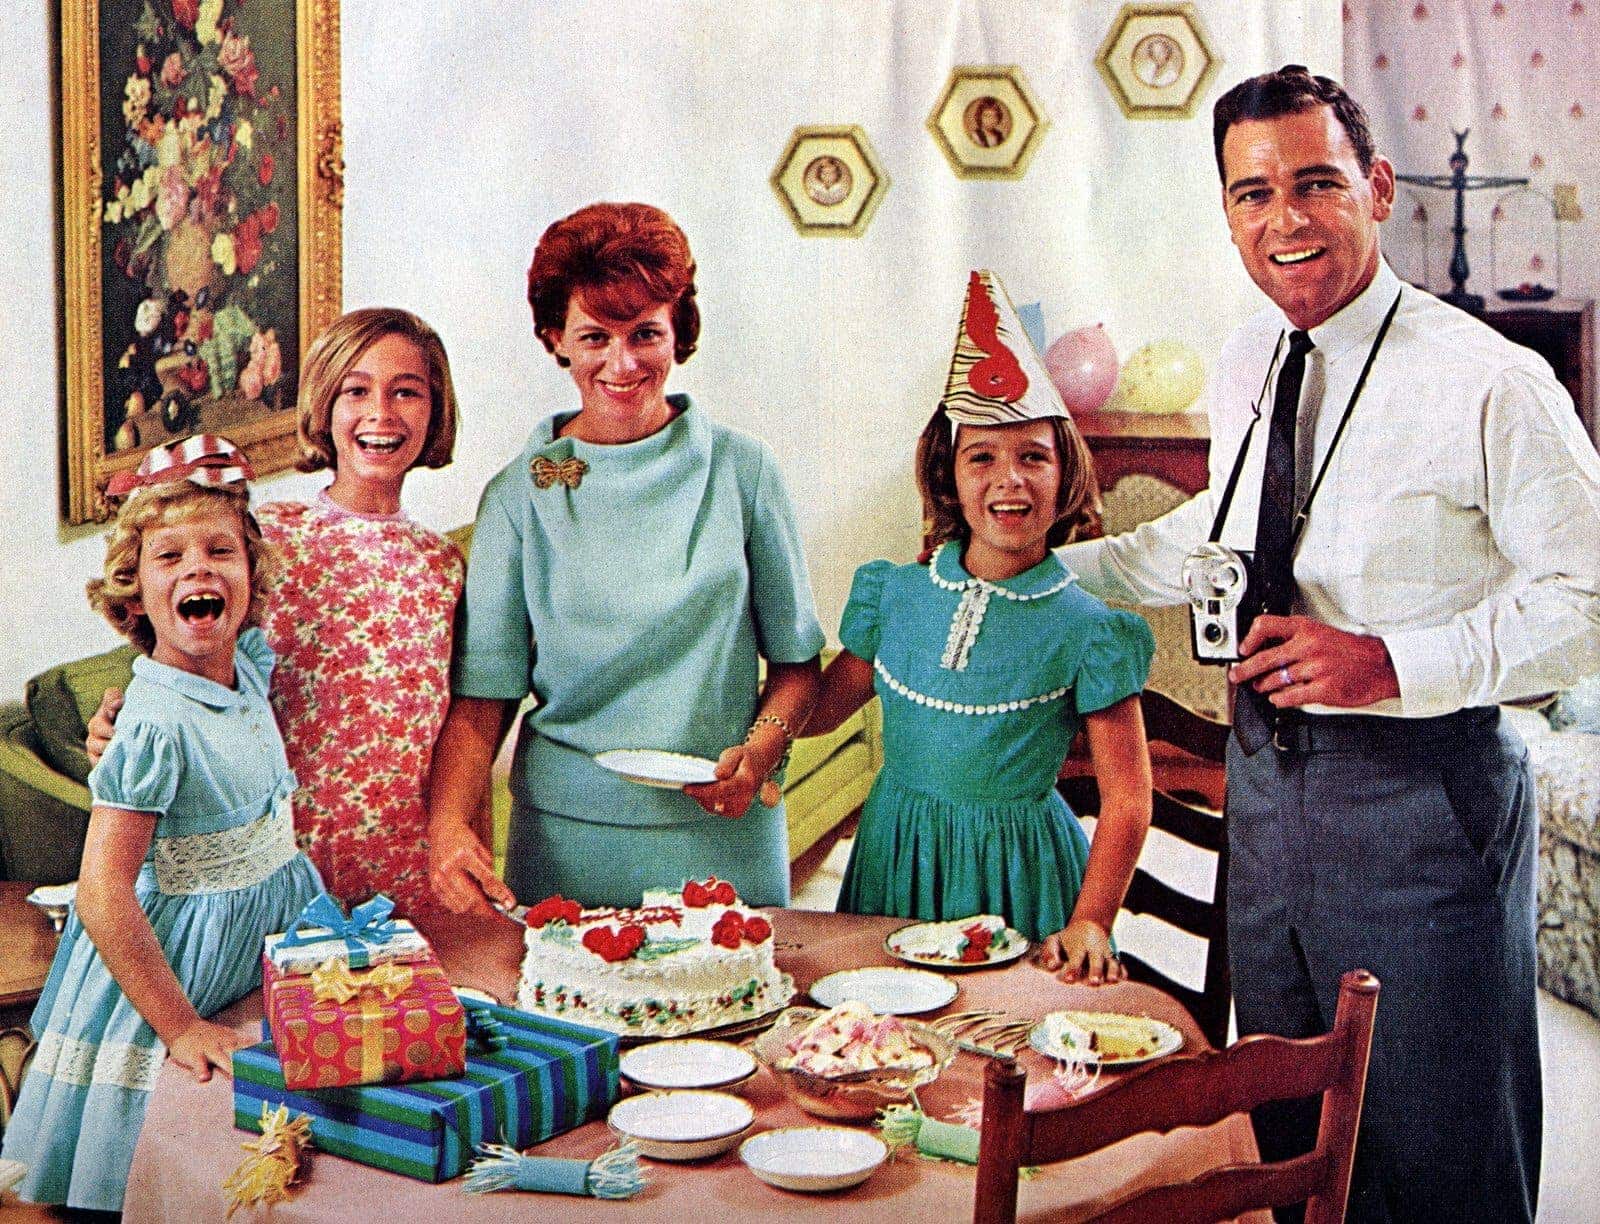 Happy-family-vintage-birthday-party-from-the-mid-1960s-1.jpg